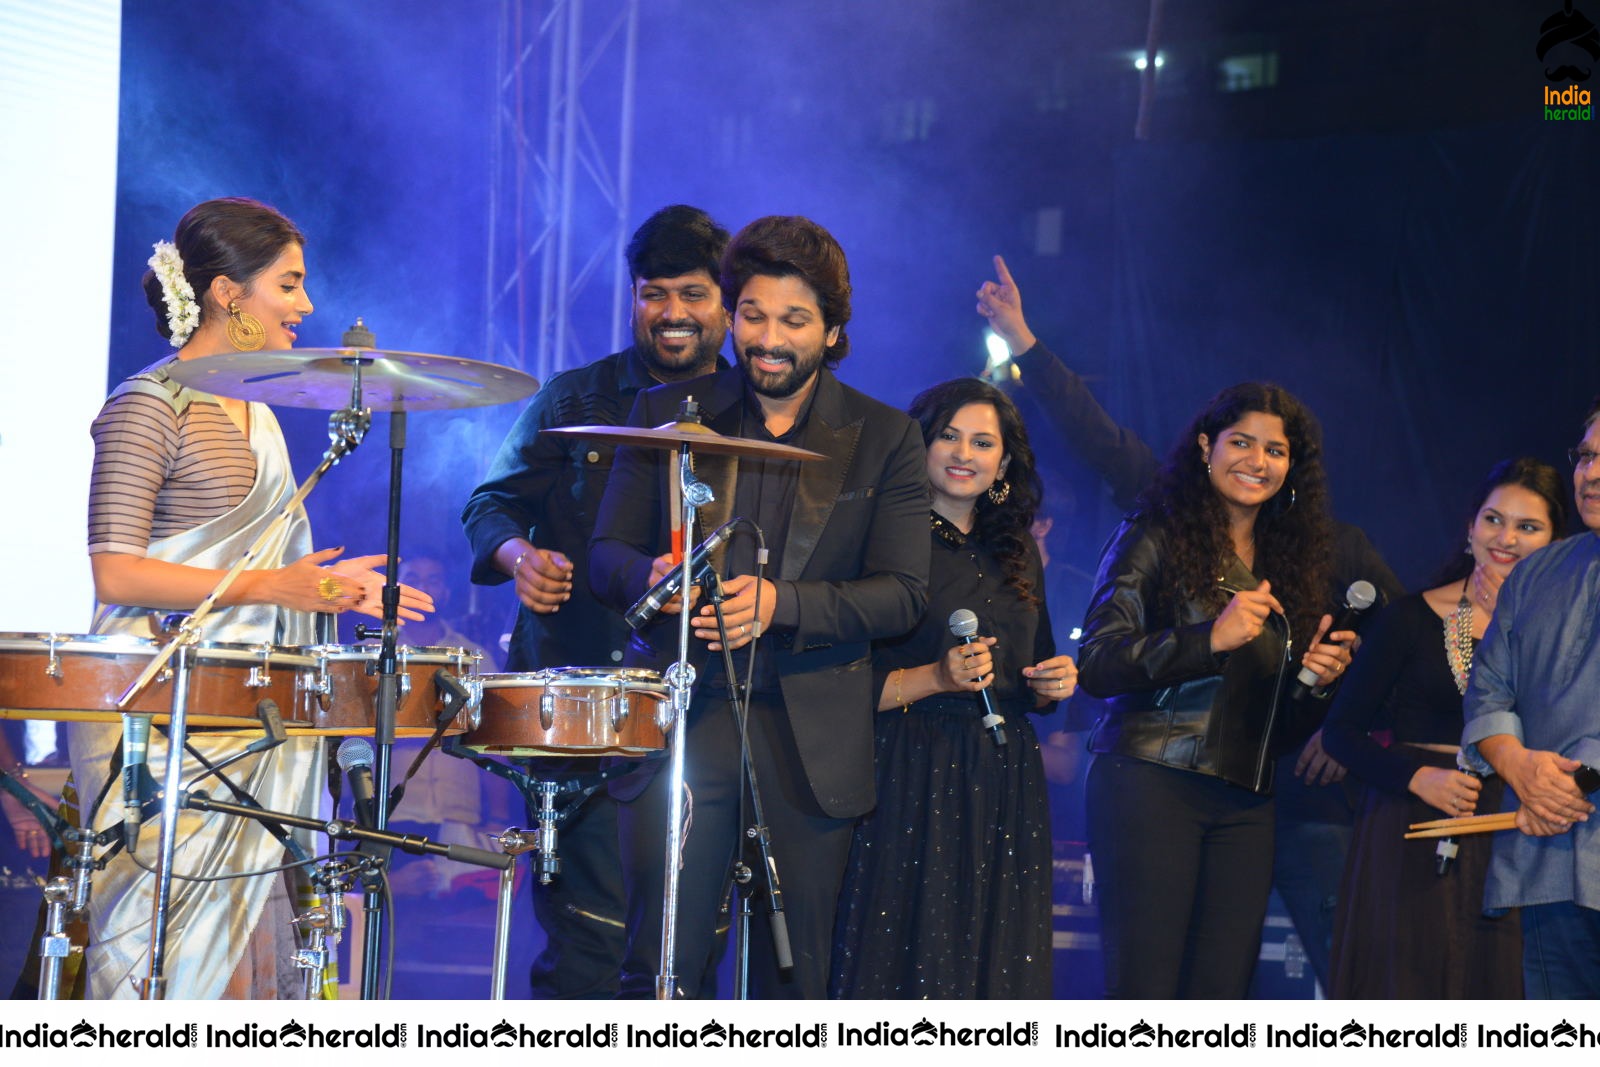 When Pooja Hegde started playing drums along with Sivamani Set 1